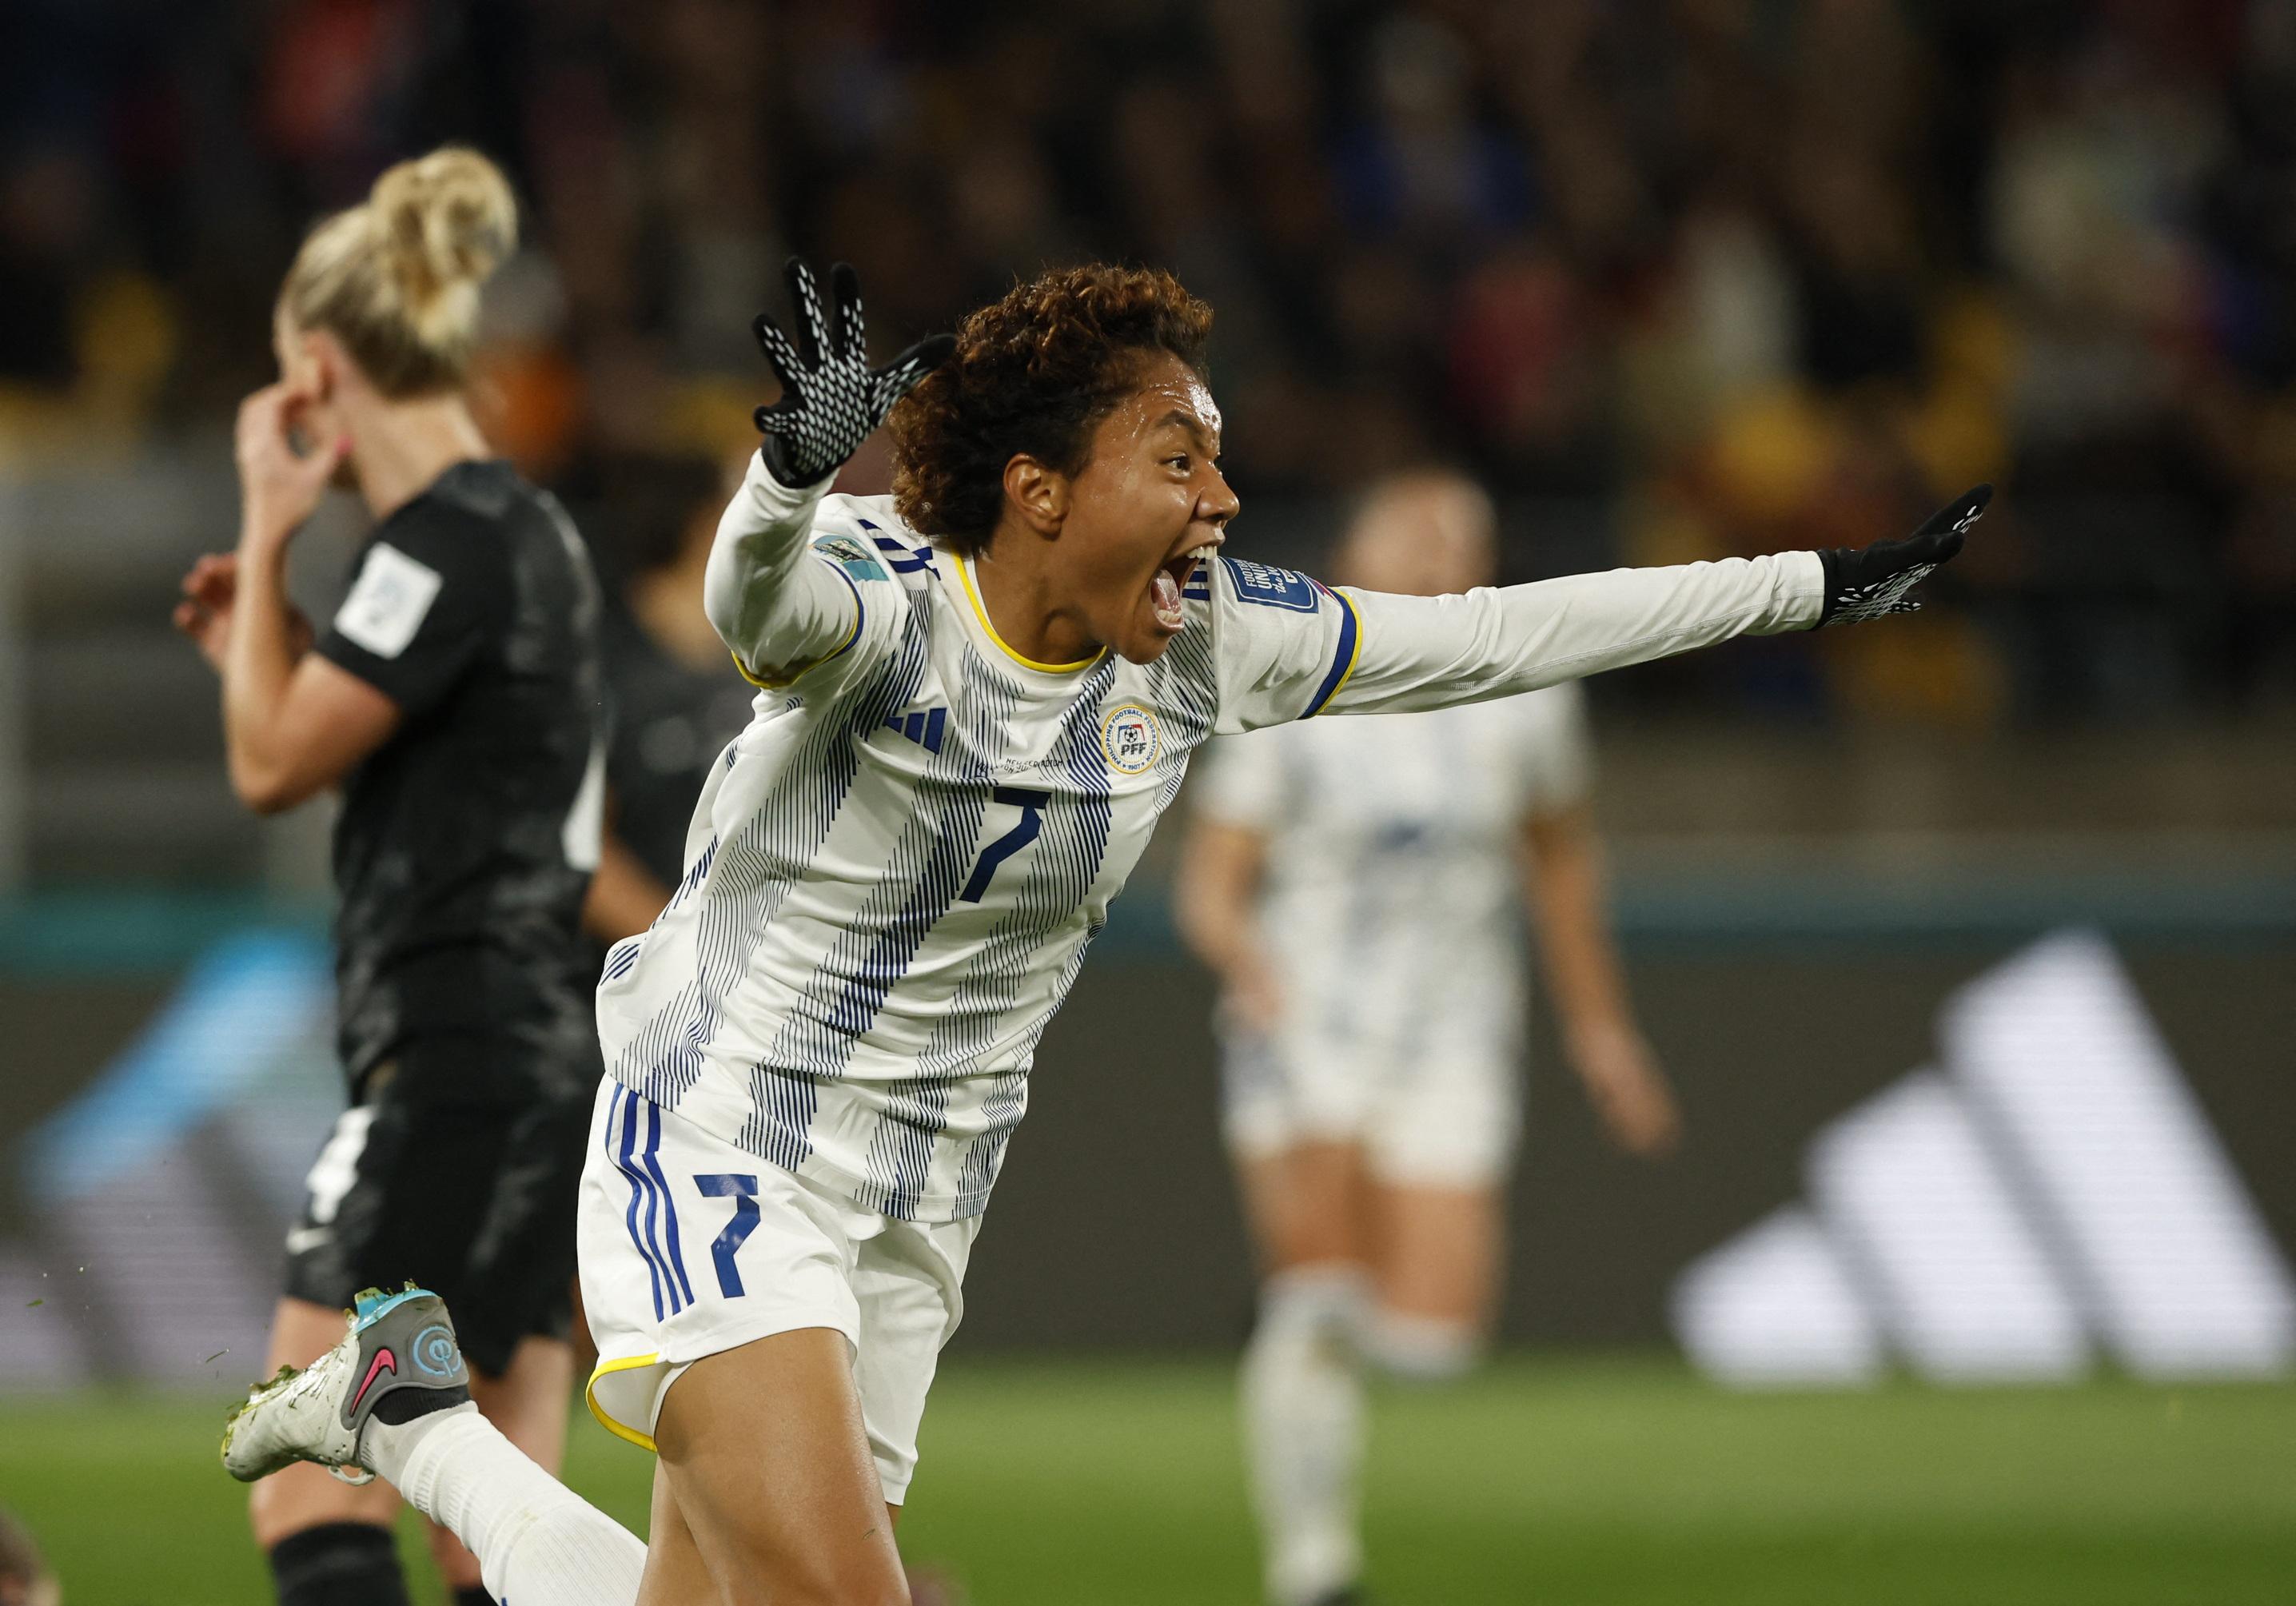 Marcos lauds Philippine women's football team over historic first win in World Cup